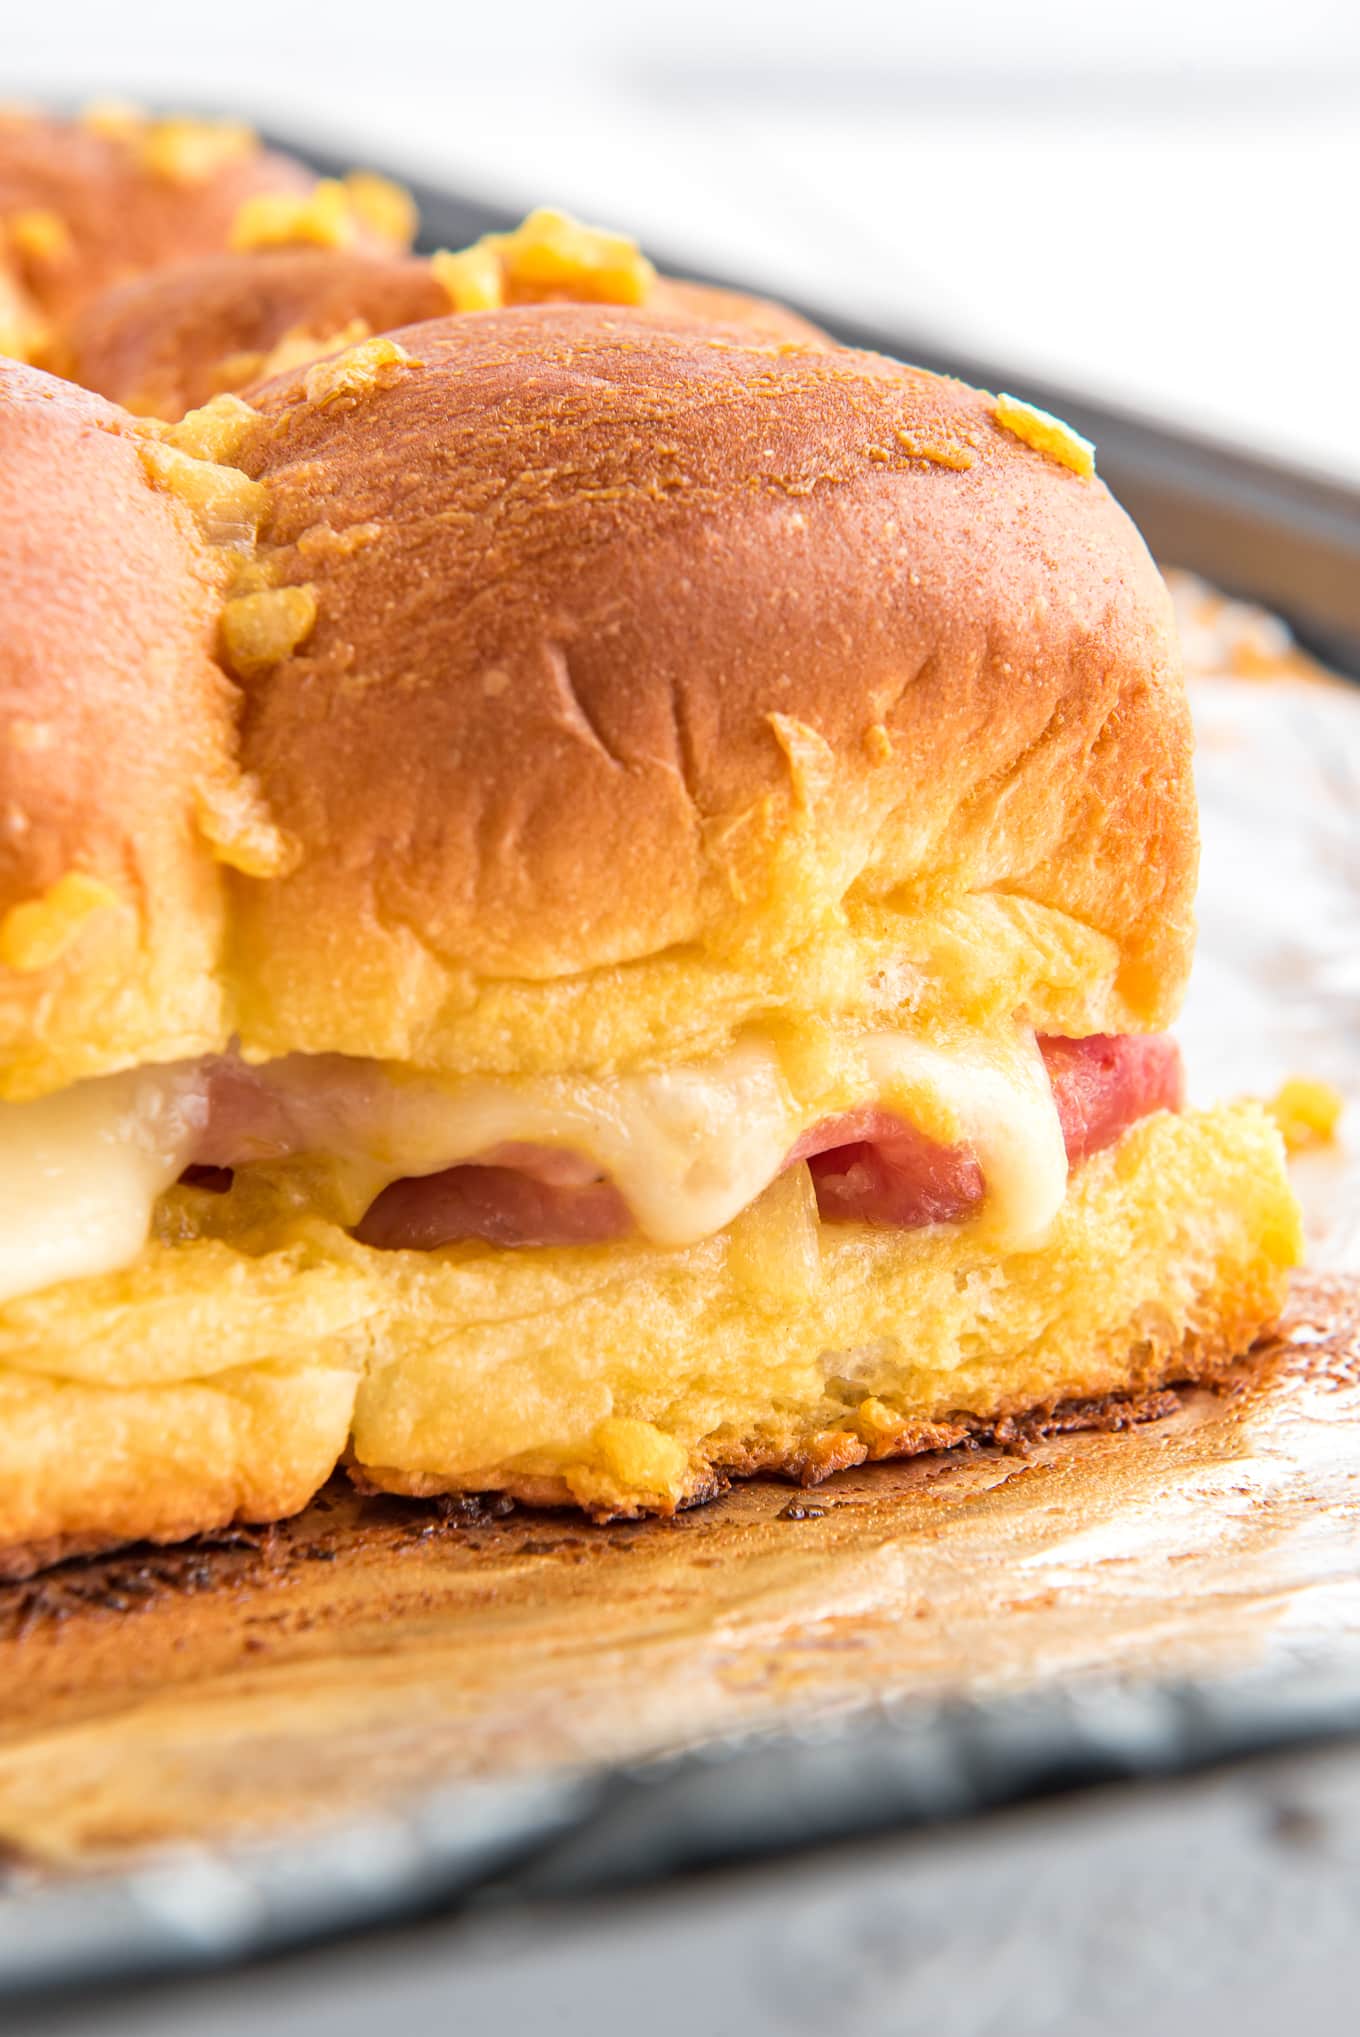 Hawaiian Rolls Sliders with ham and Swiss cheese on baking tray./ Delicious ham and cheese sliders on soft and sweet Hawaiian rolls, stacked with melted cheese, juicy ham, and topped with a golden-brown glaze, perfect for a quick dinner or appetizer. 